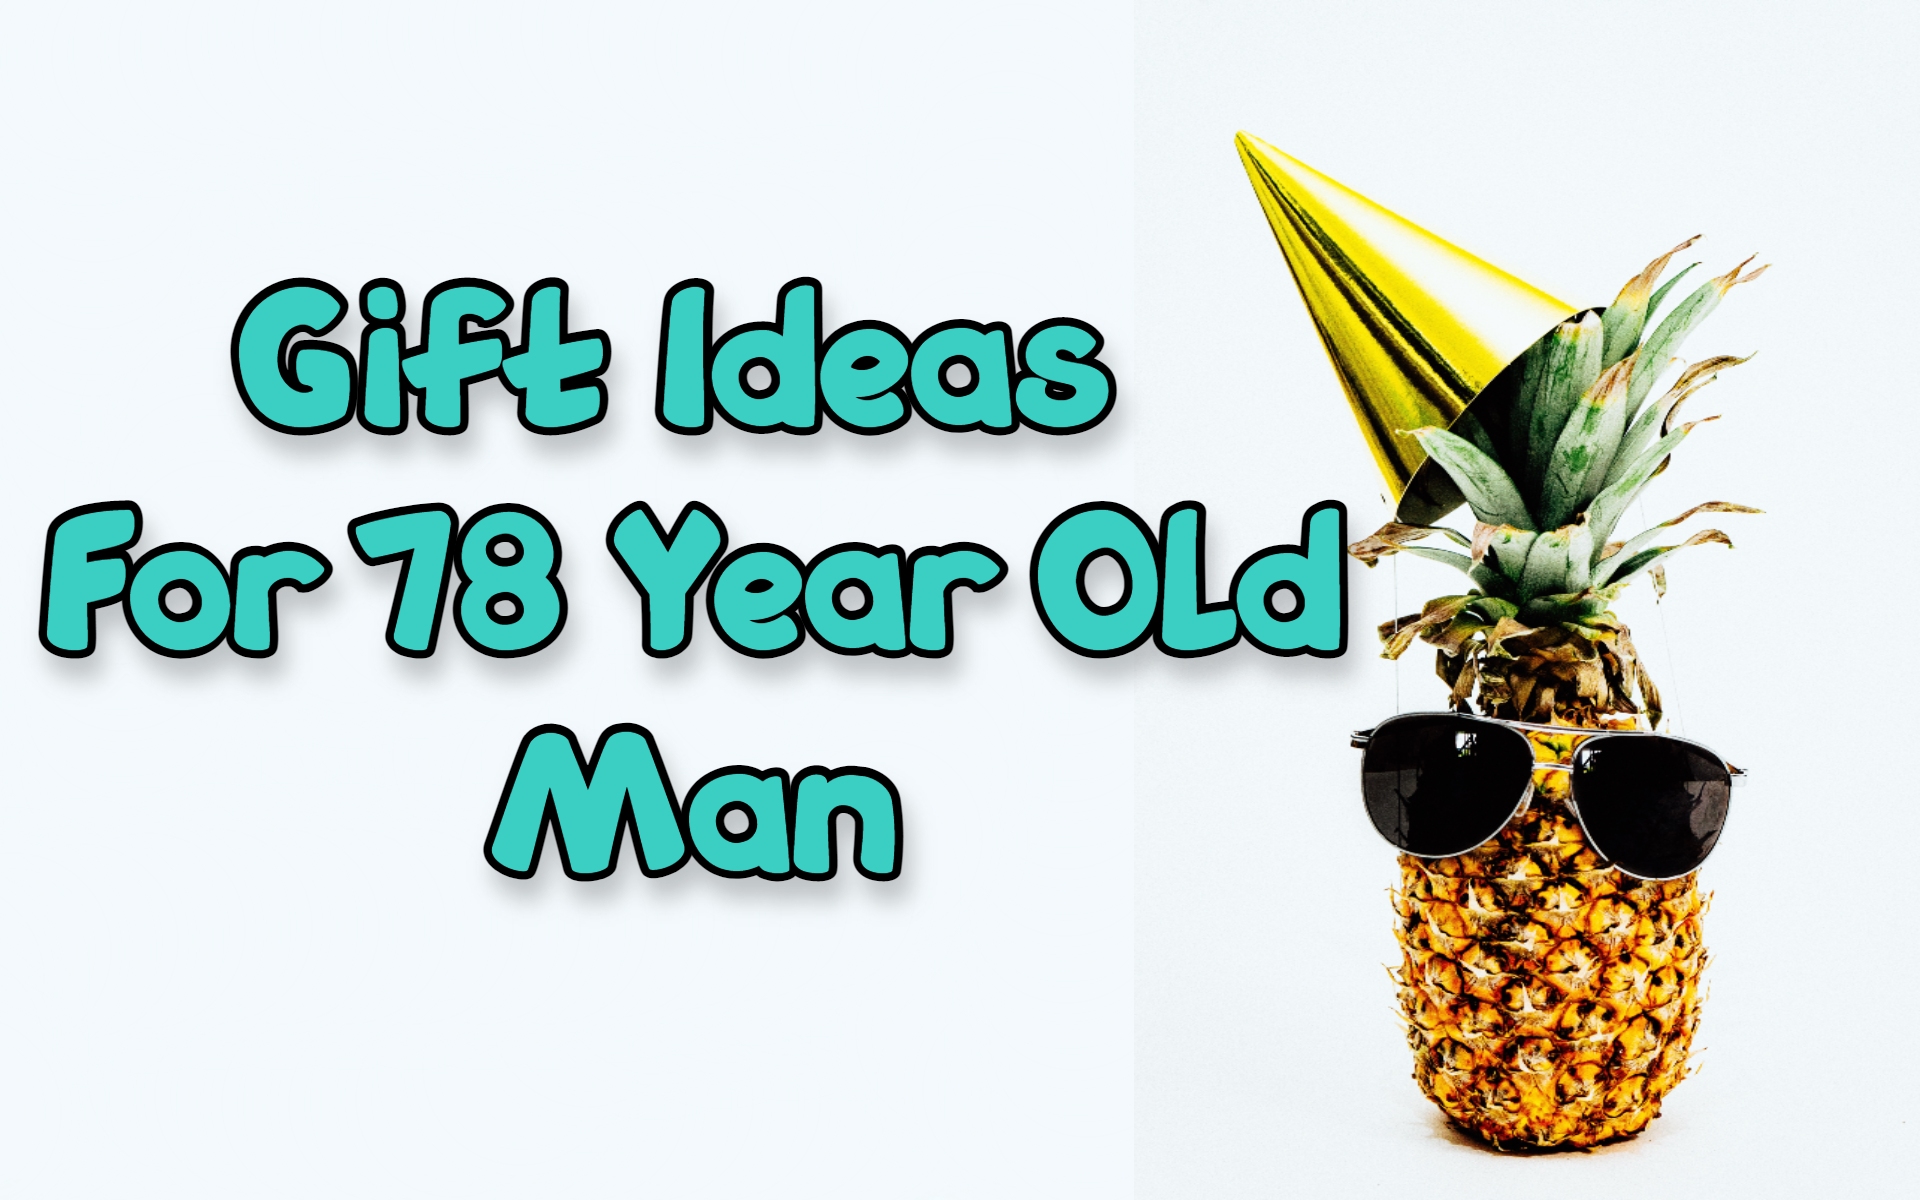 Cover image of gift ideas for 78-year-old man by Giftsedge